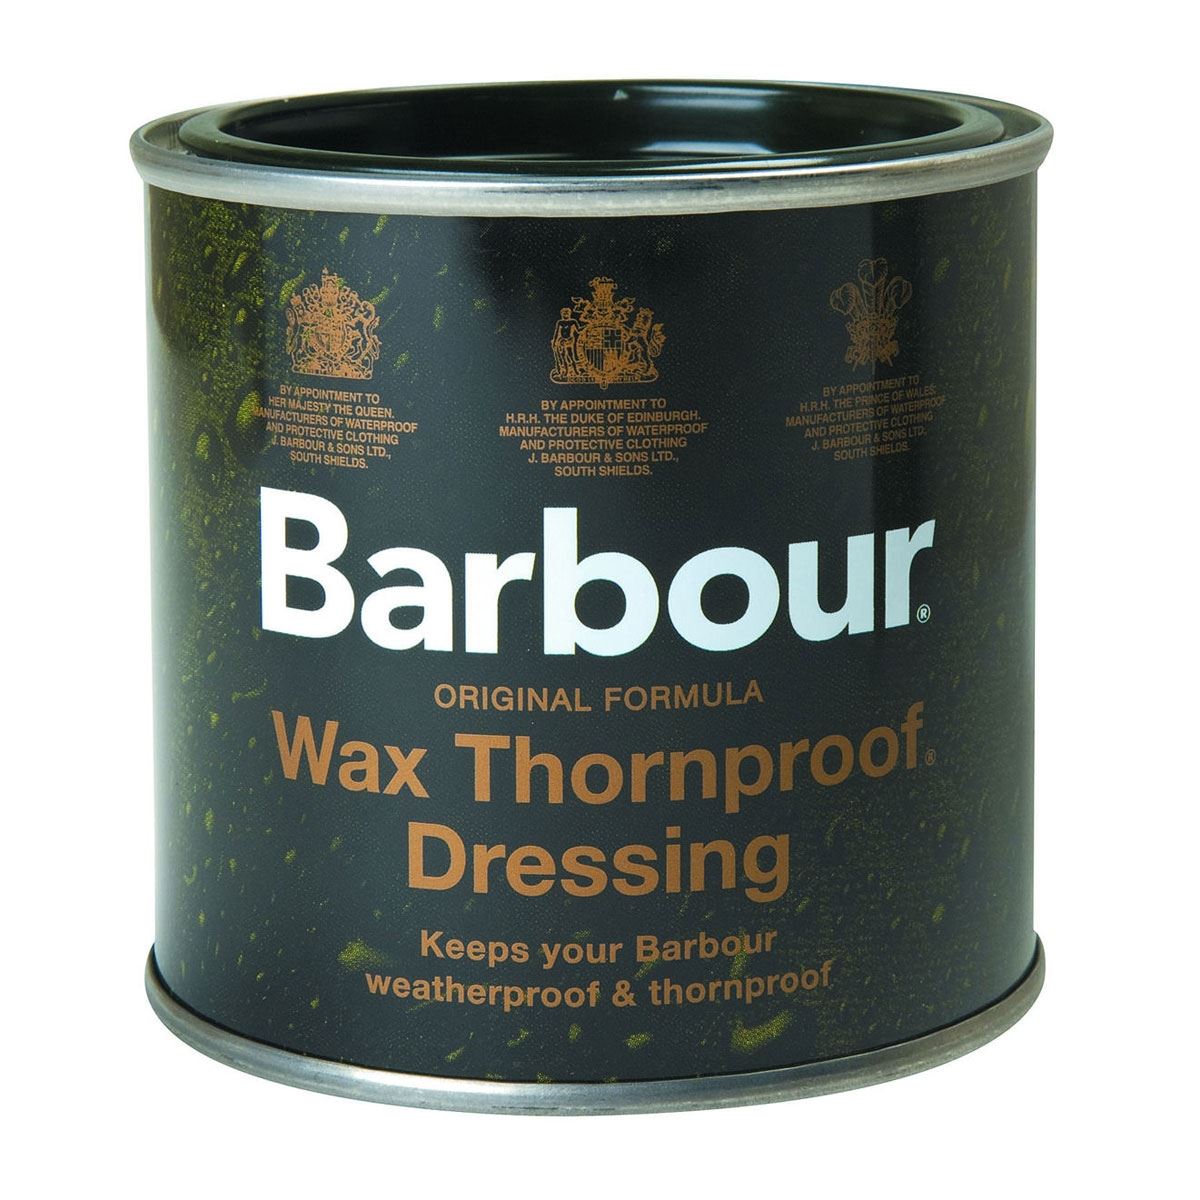 How does Barbour Wax Thornproof Dressing extend the lifespan of Barbour wax jackets?